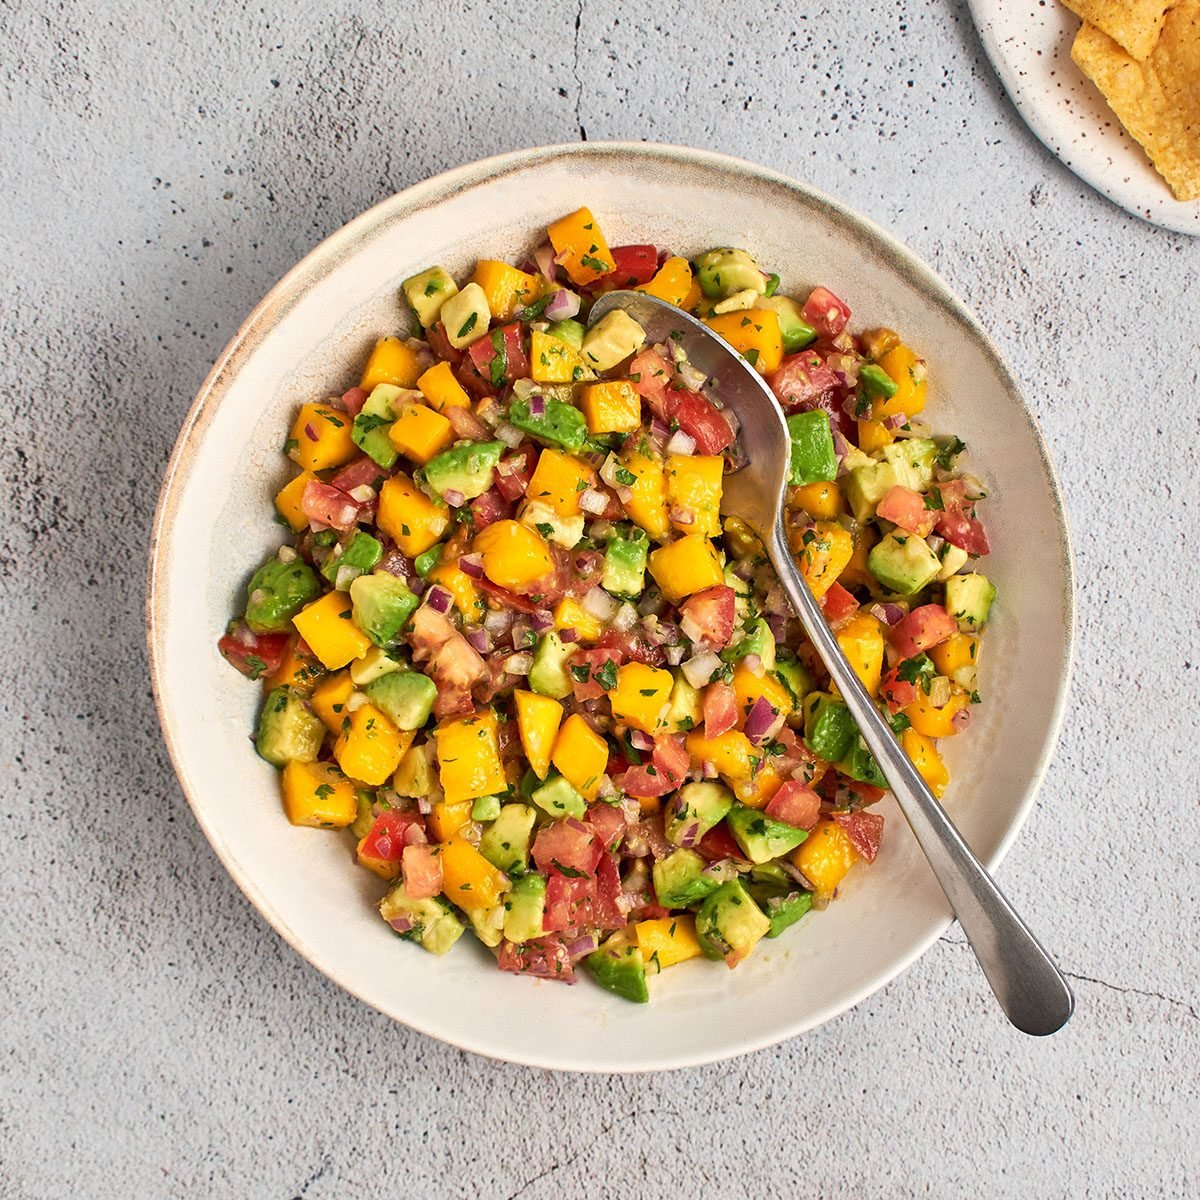 This mango avocado salsa recipe by Taste of Home takes your favorite chip dip and elevates it, thanks to the addition of sweet, tropical mango.